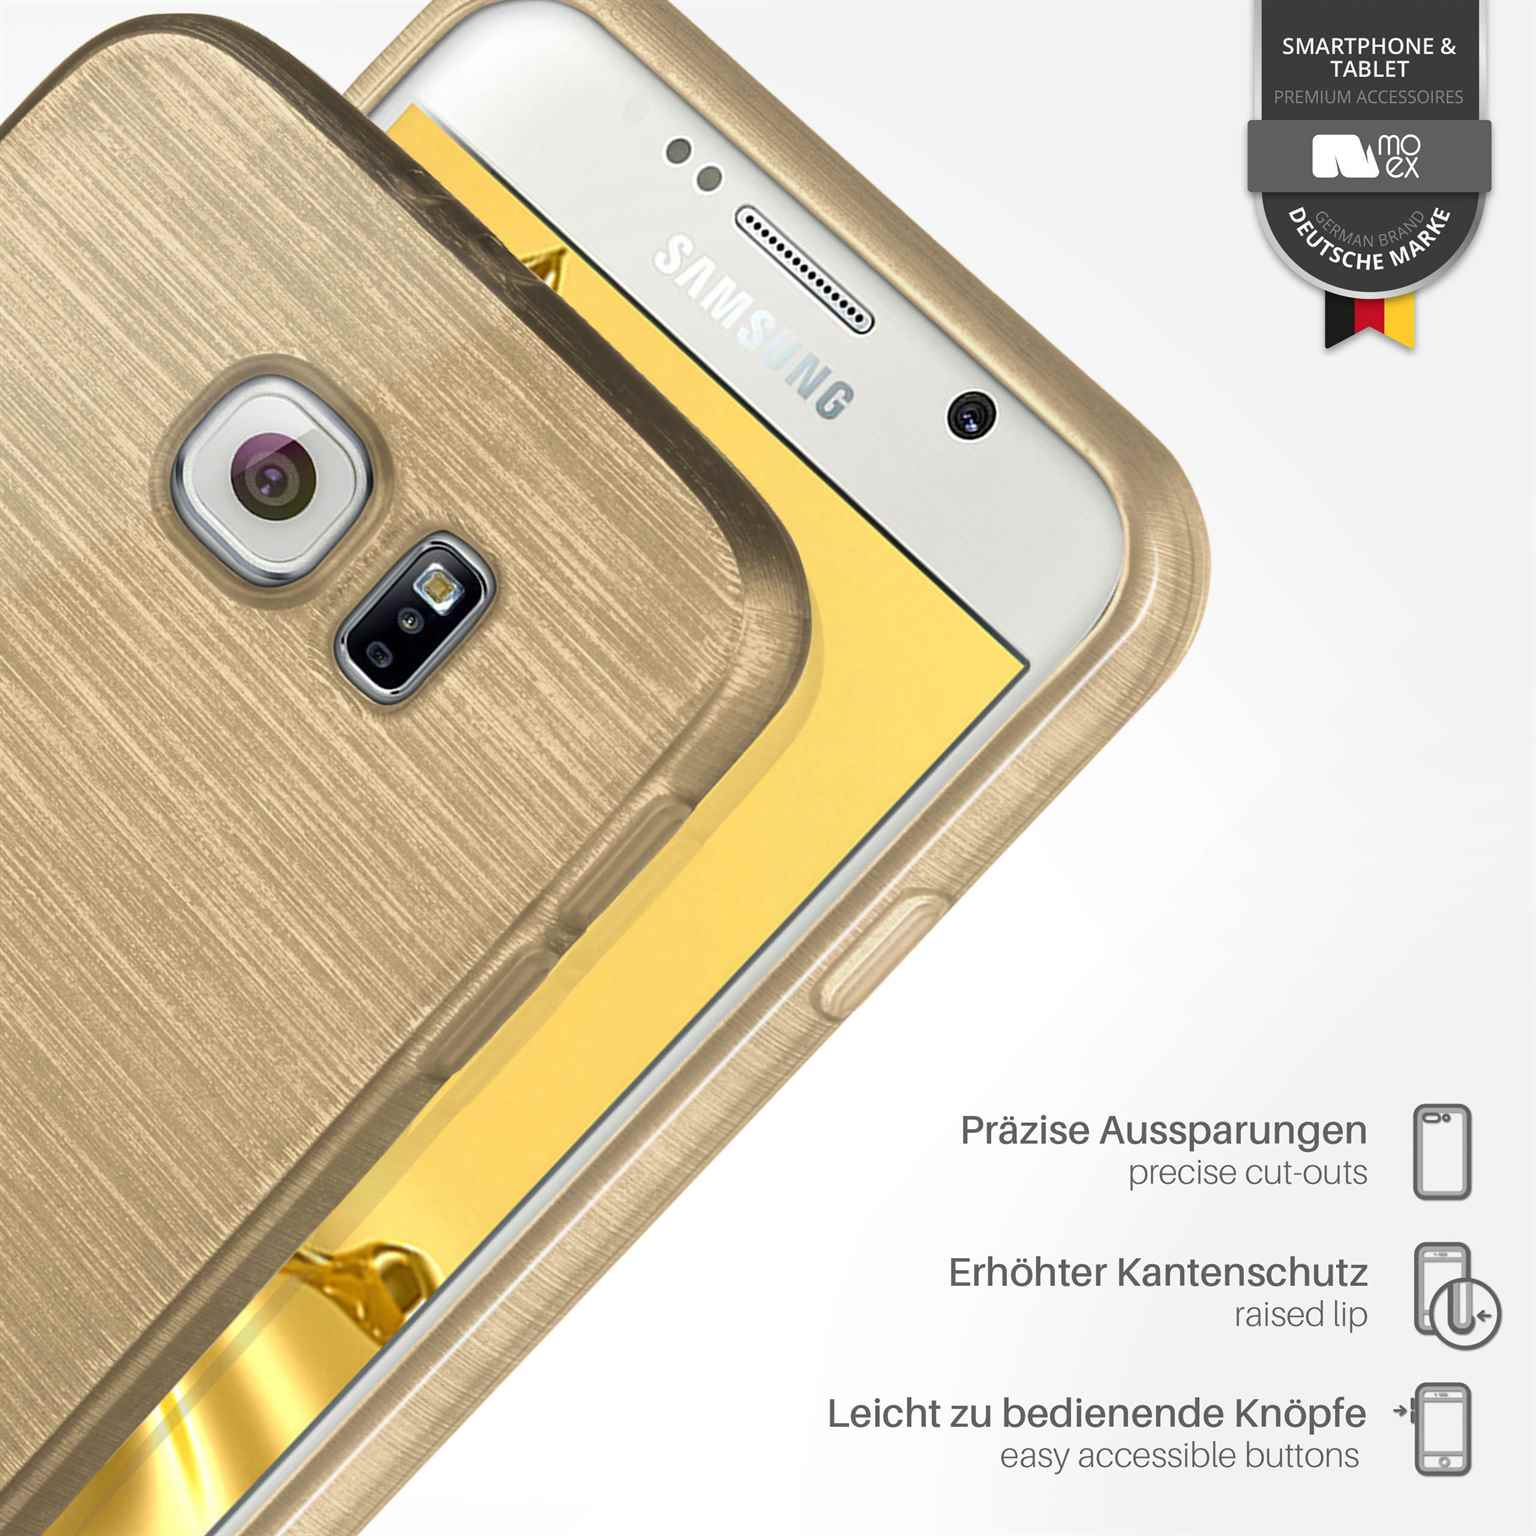 Ivory-Gold Backcover, Case, Galaxy MOEX Brushed S6, Samsung,